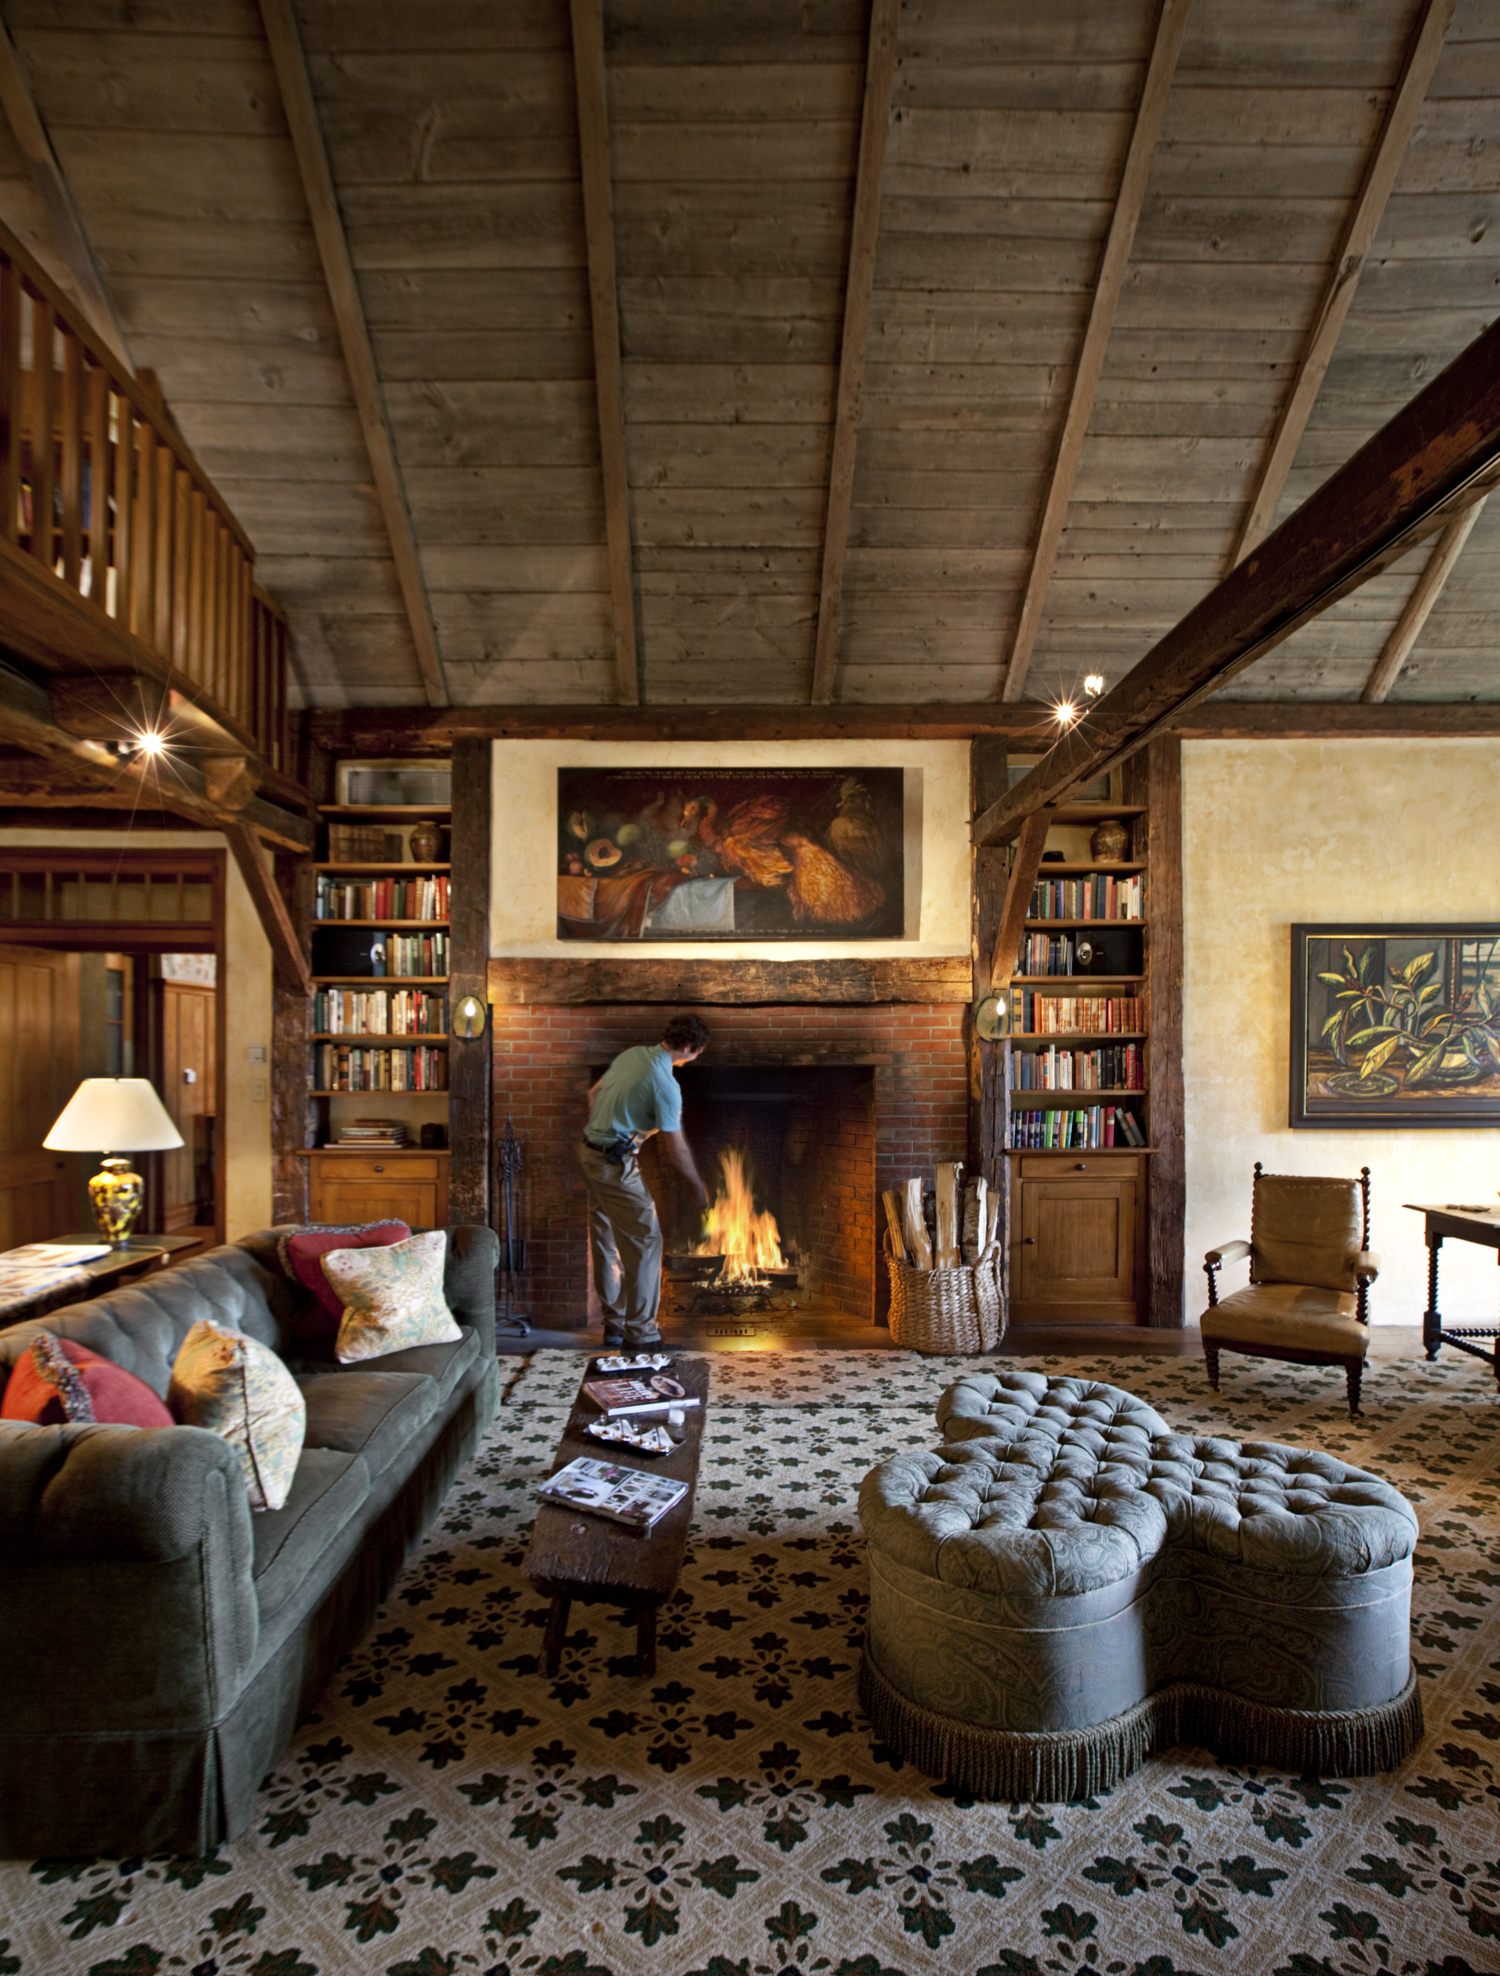 The library at Twin Farms, just one of the bespoke places found throughout the Vermont resort. Hannah Selinger photo